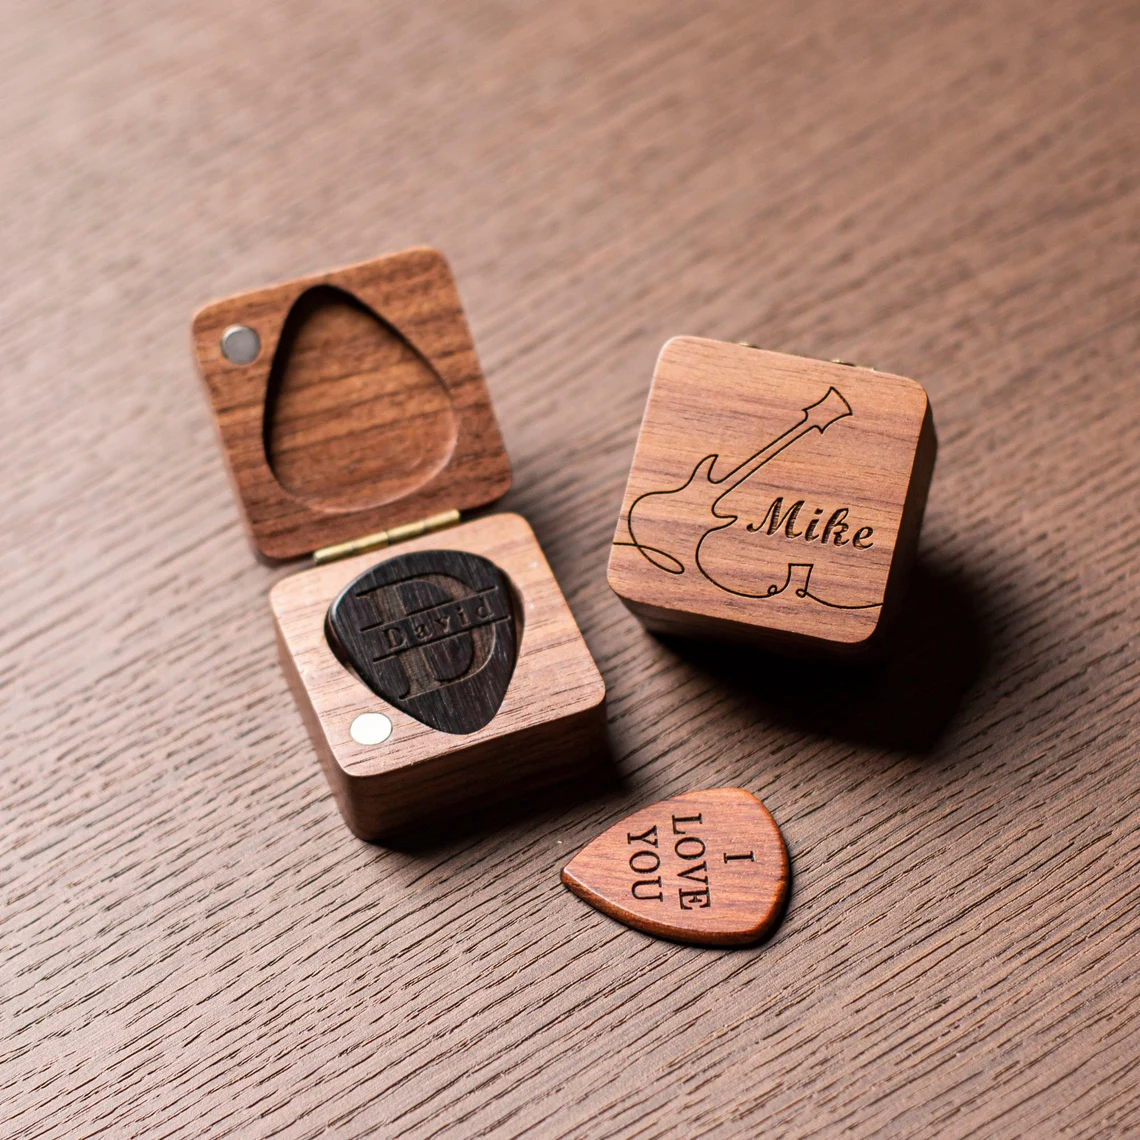 Ukulele picks as part of 10 best gifts for ukulele players in 2023
